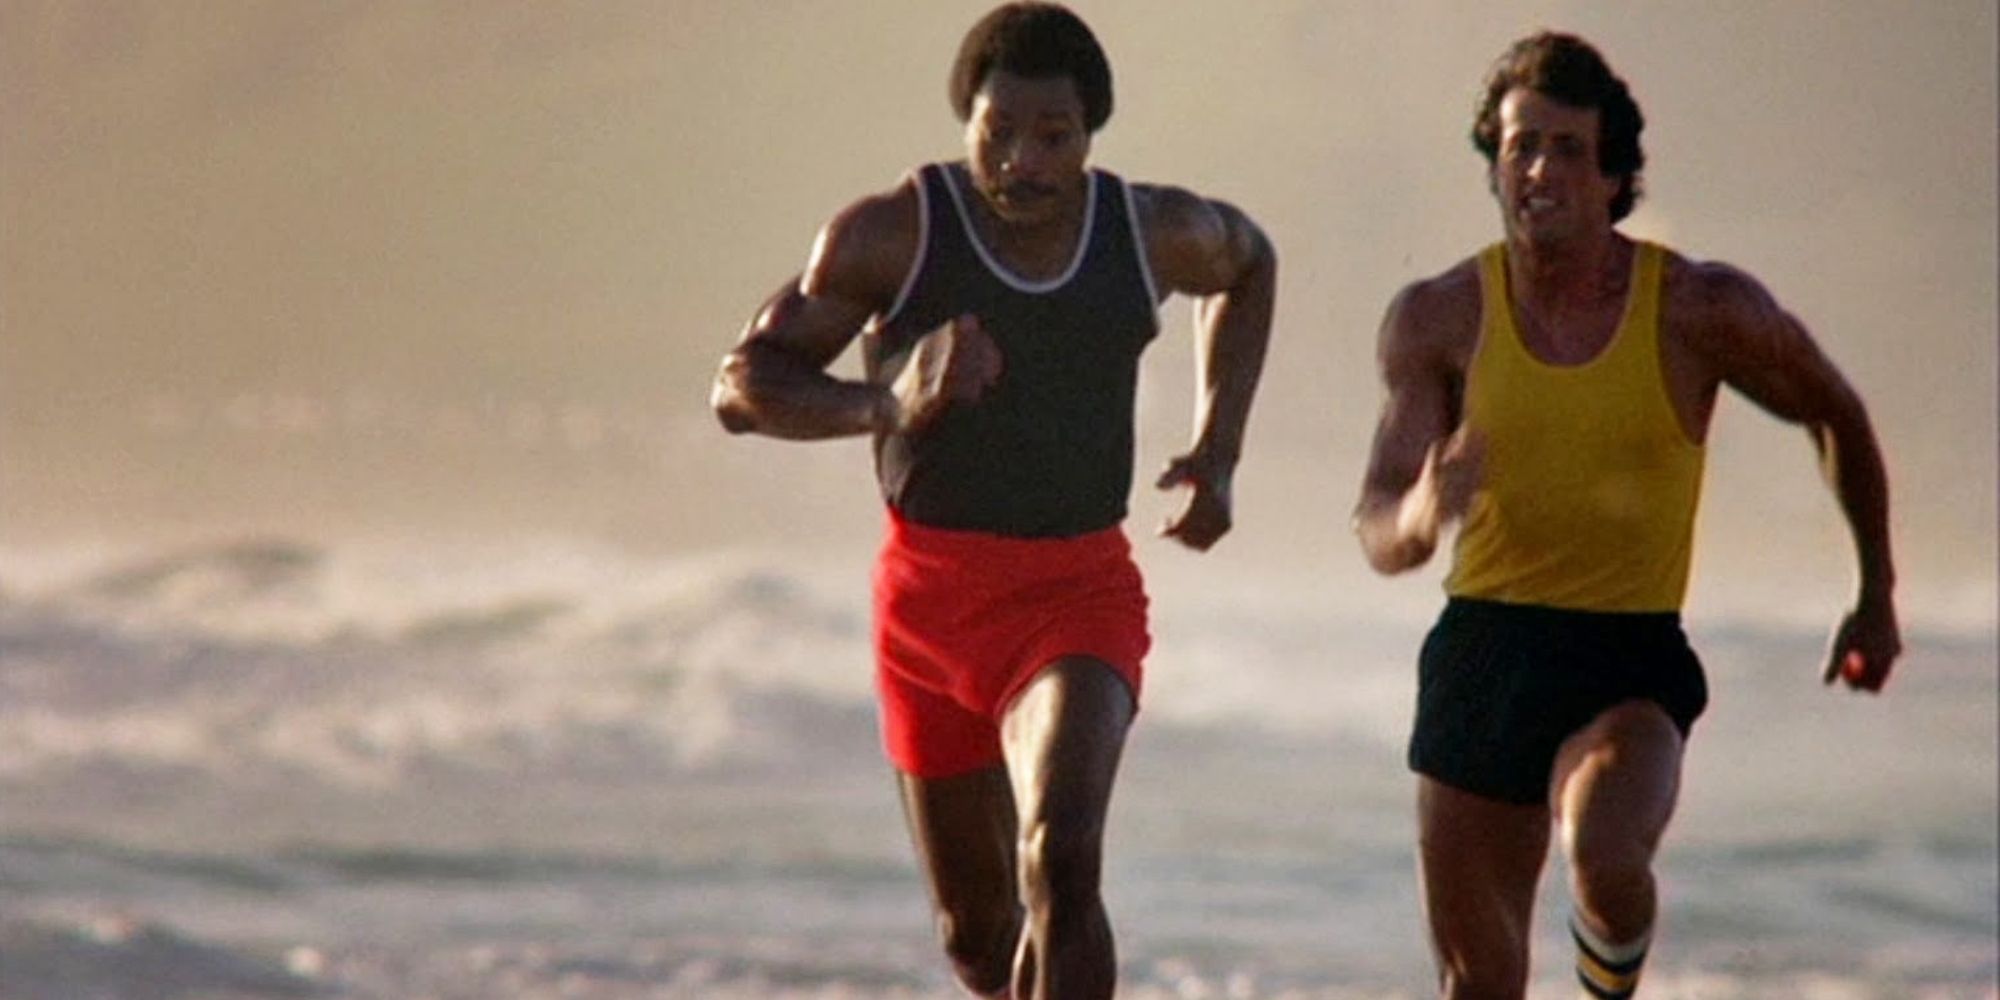 Carl Weathers and Sylvester Stallone as Apollo Creed and Rocky Balboa, running on the beach in Rocky III